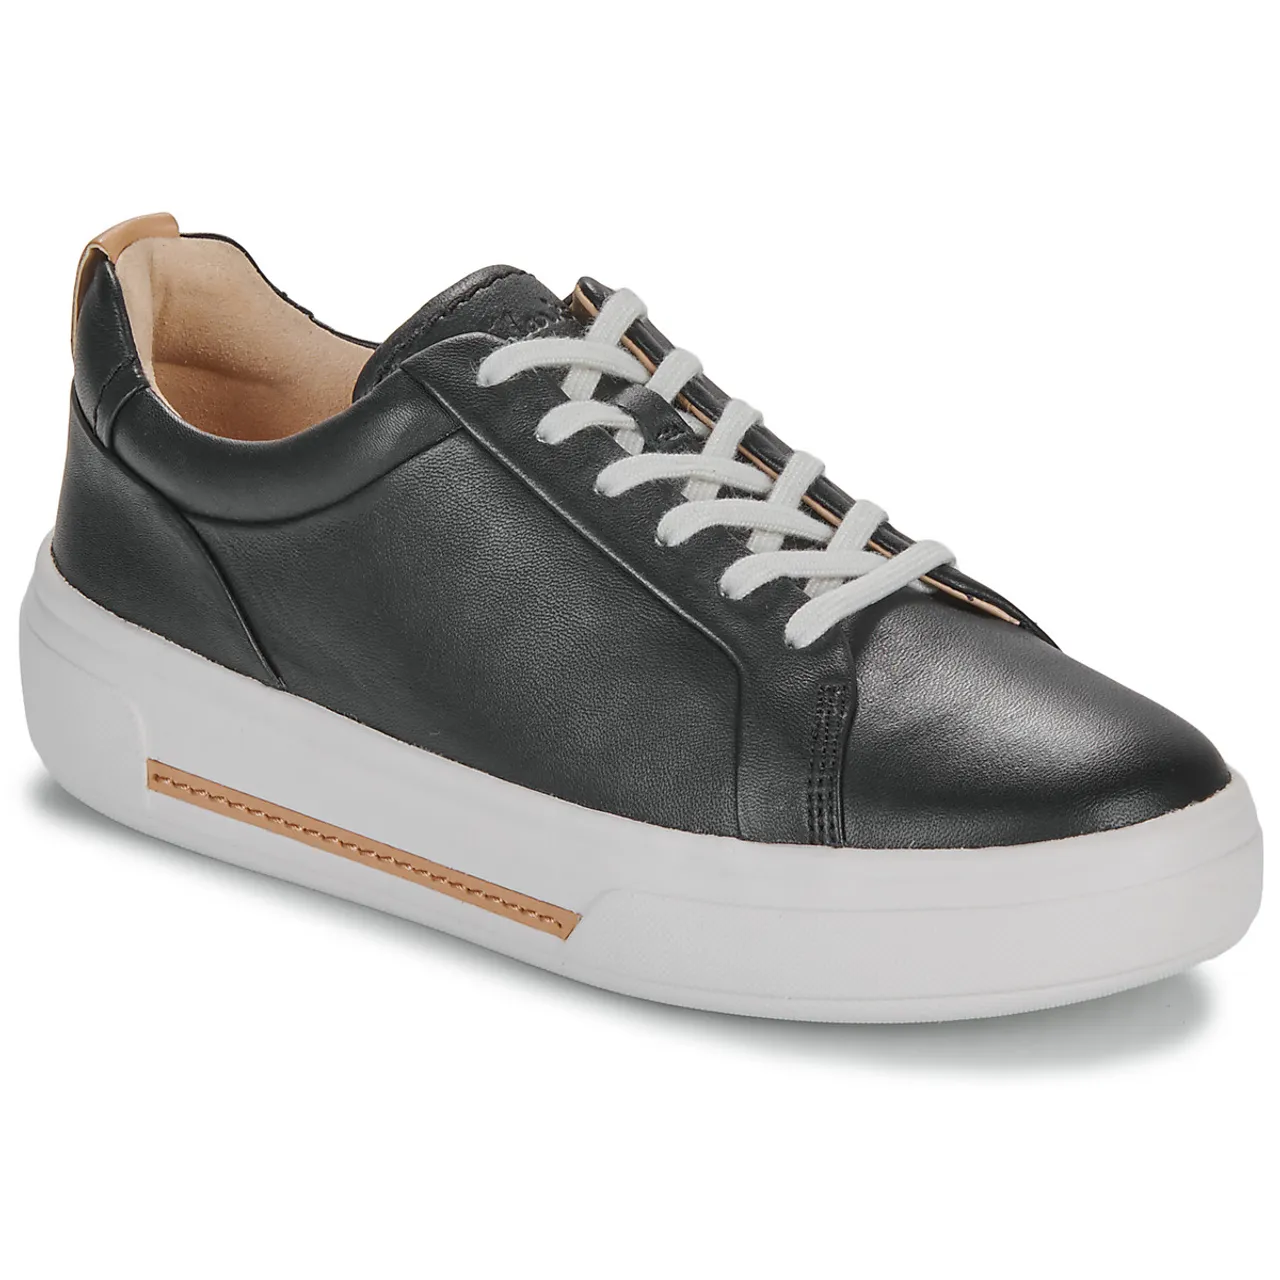 Clarks  HOLLYHOCK  women's Shoes (Trainers) in Black